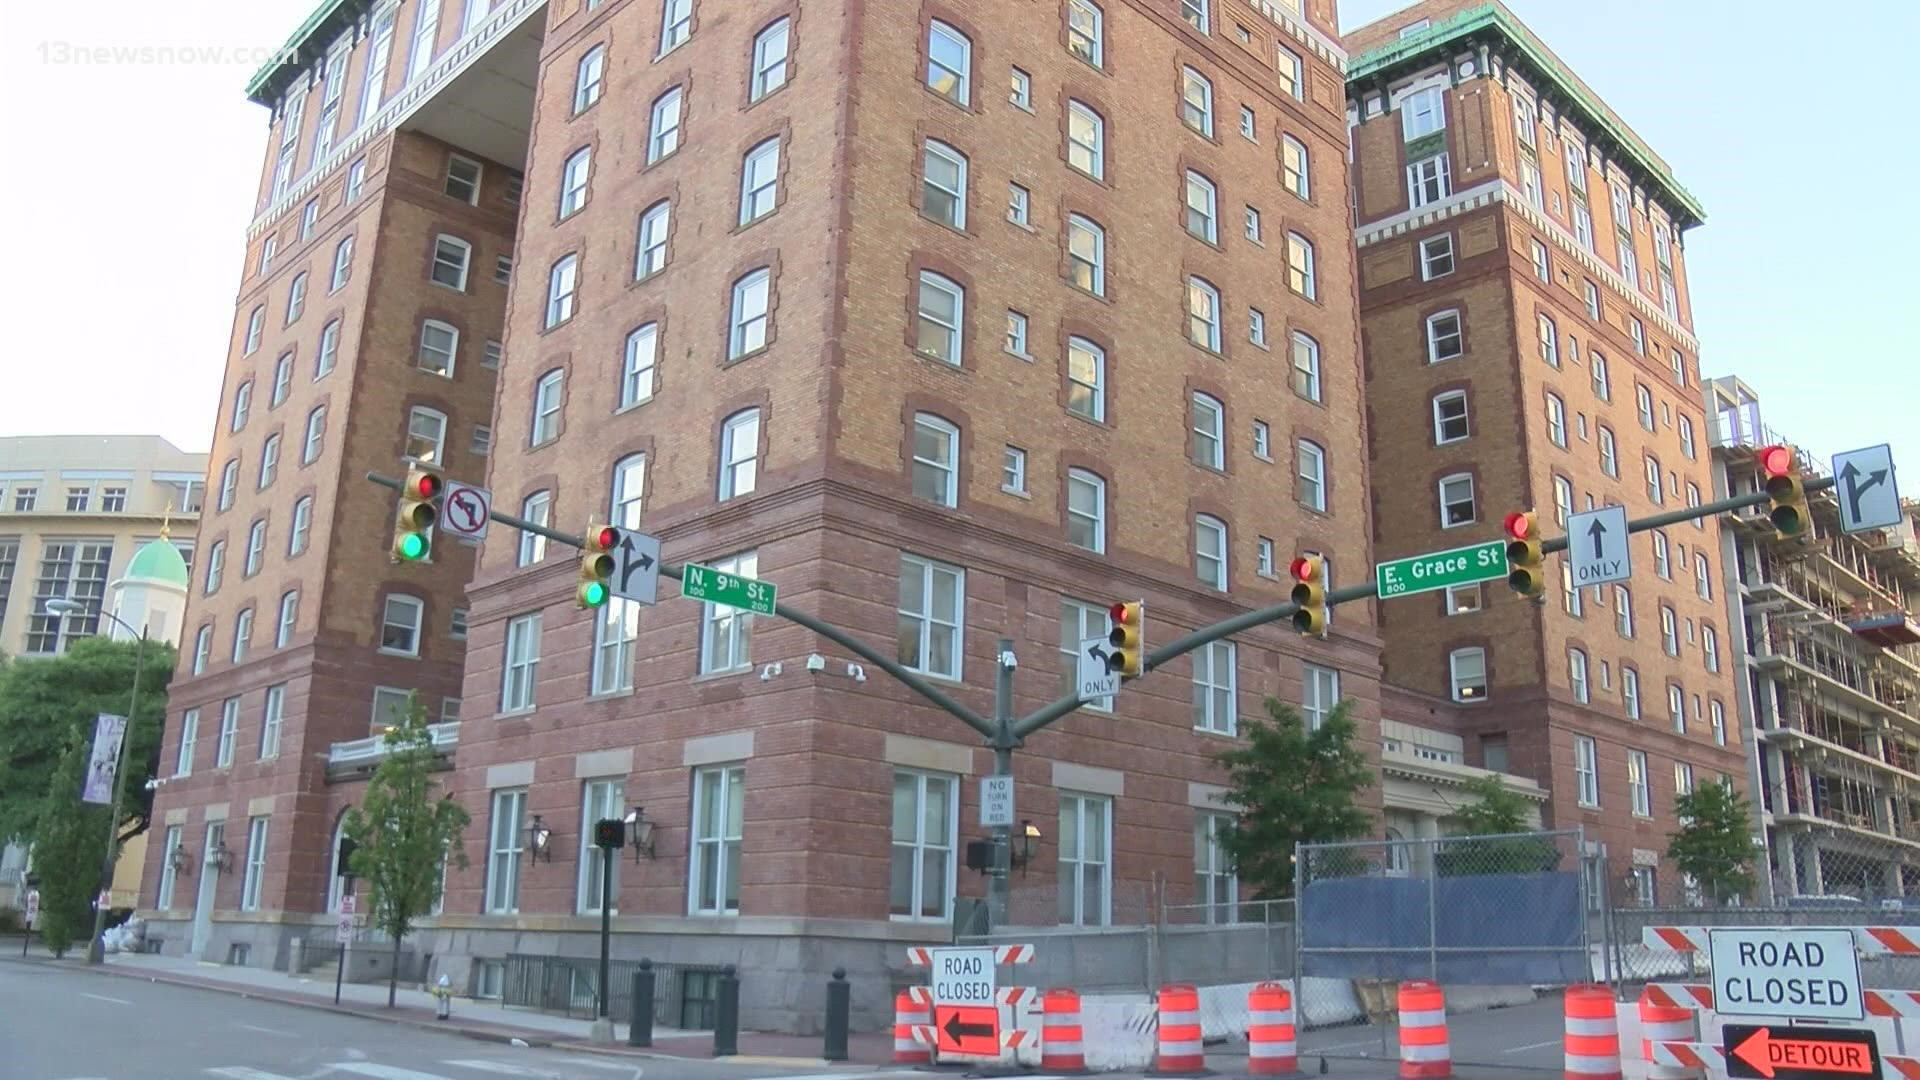 The AG’s office said housekeeping staff found the bullet in a sixth-floor office.